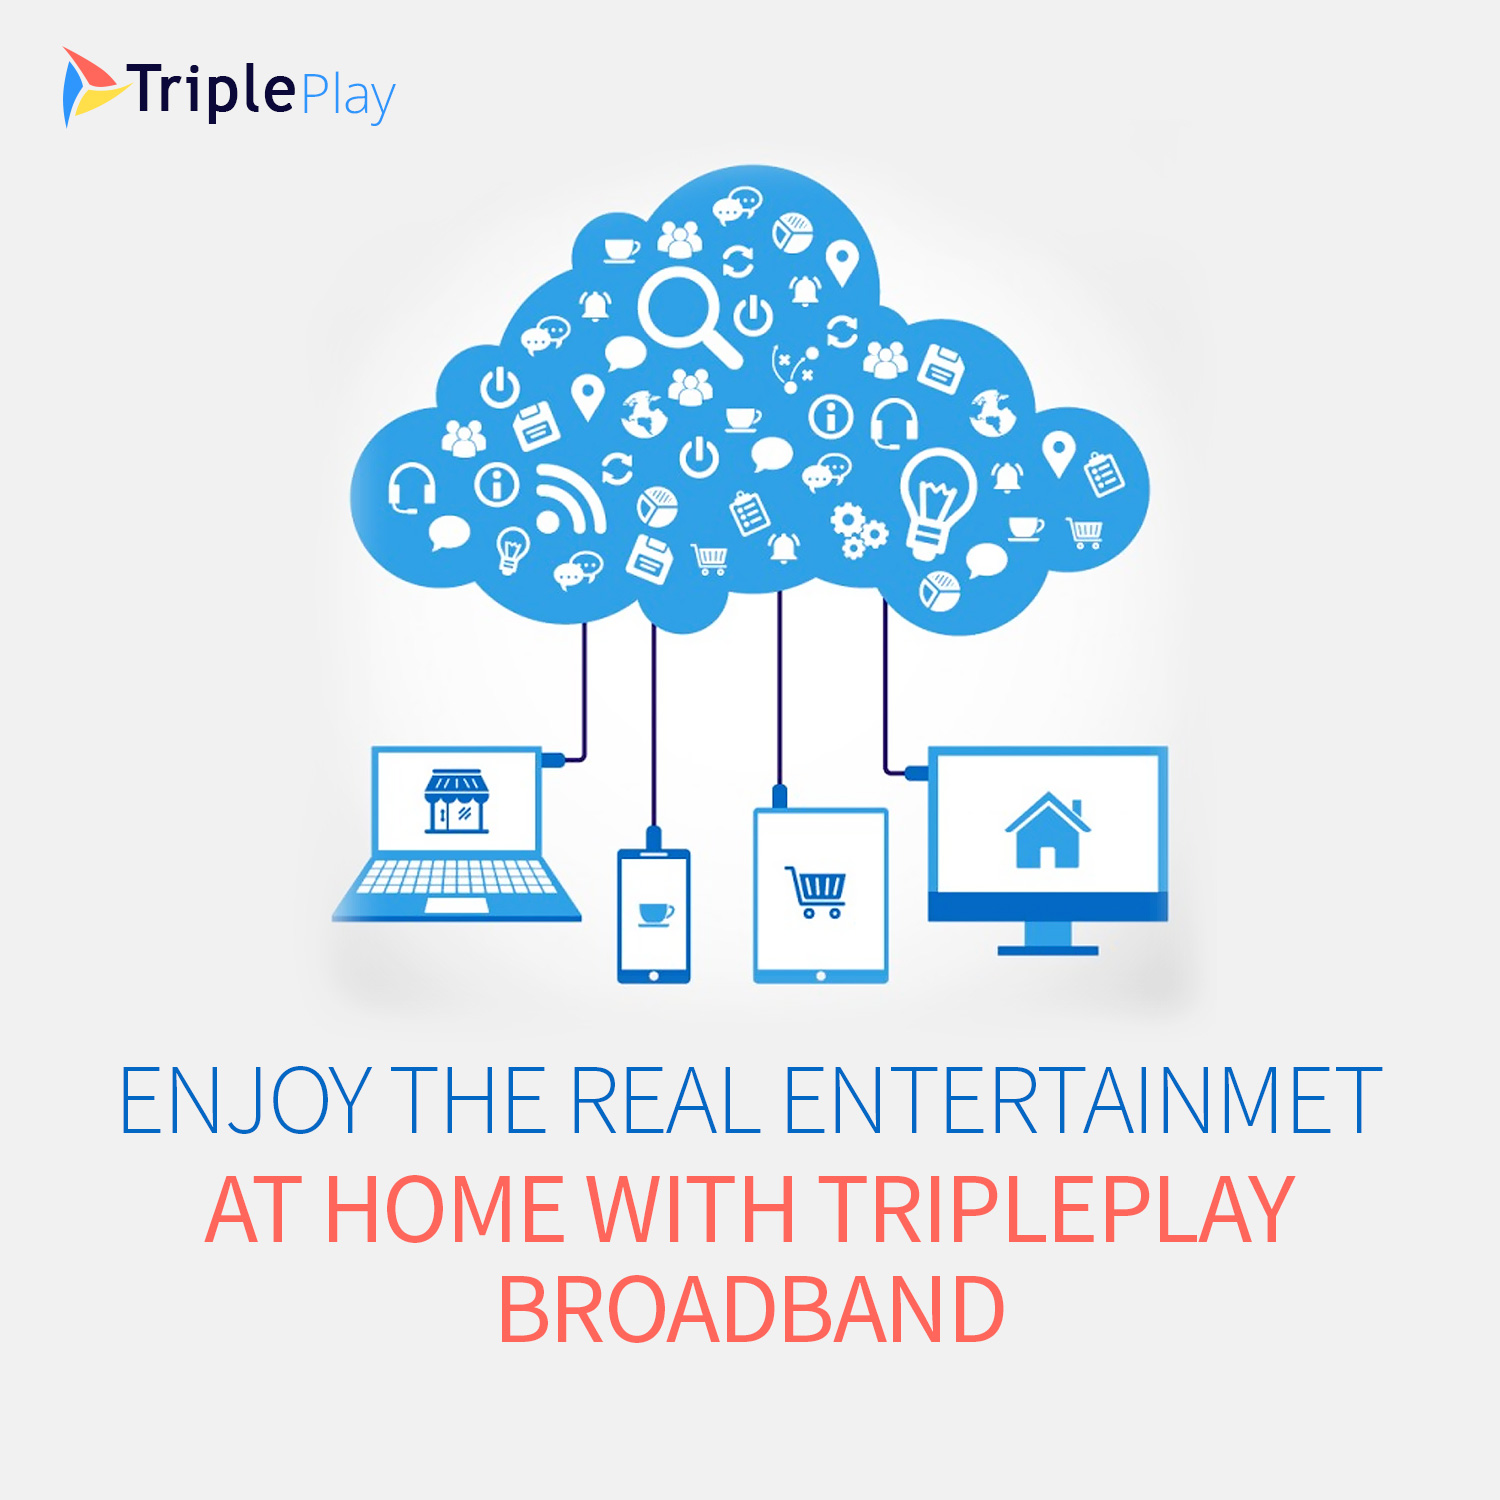 Enjoy the Real Entertainment at Home with TriplePlay Broadband